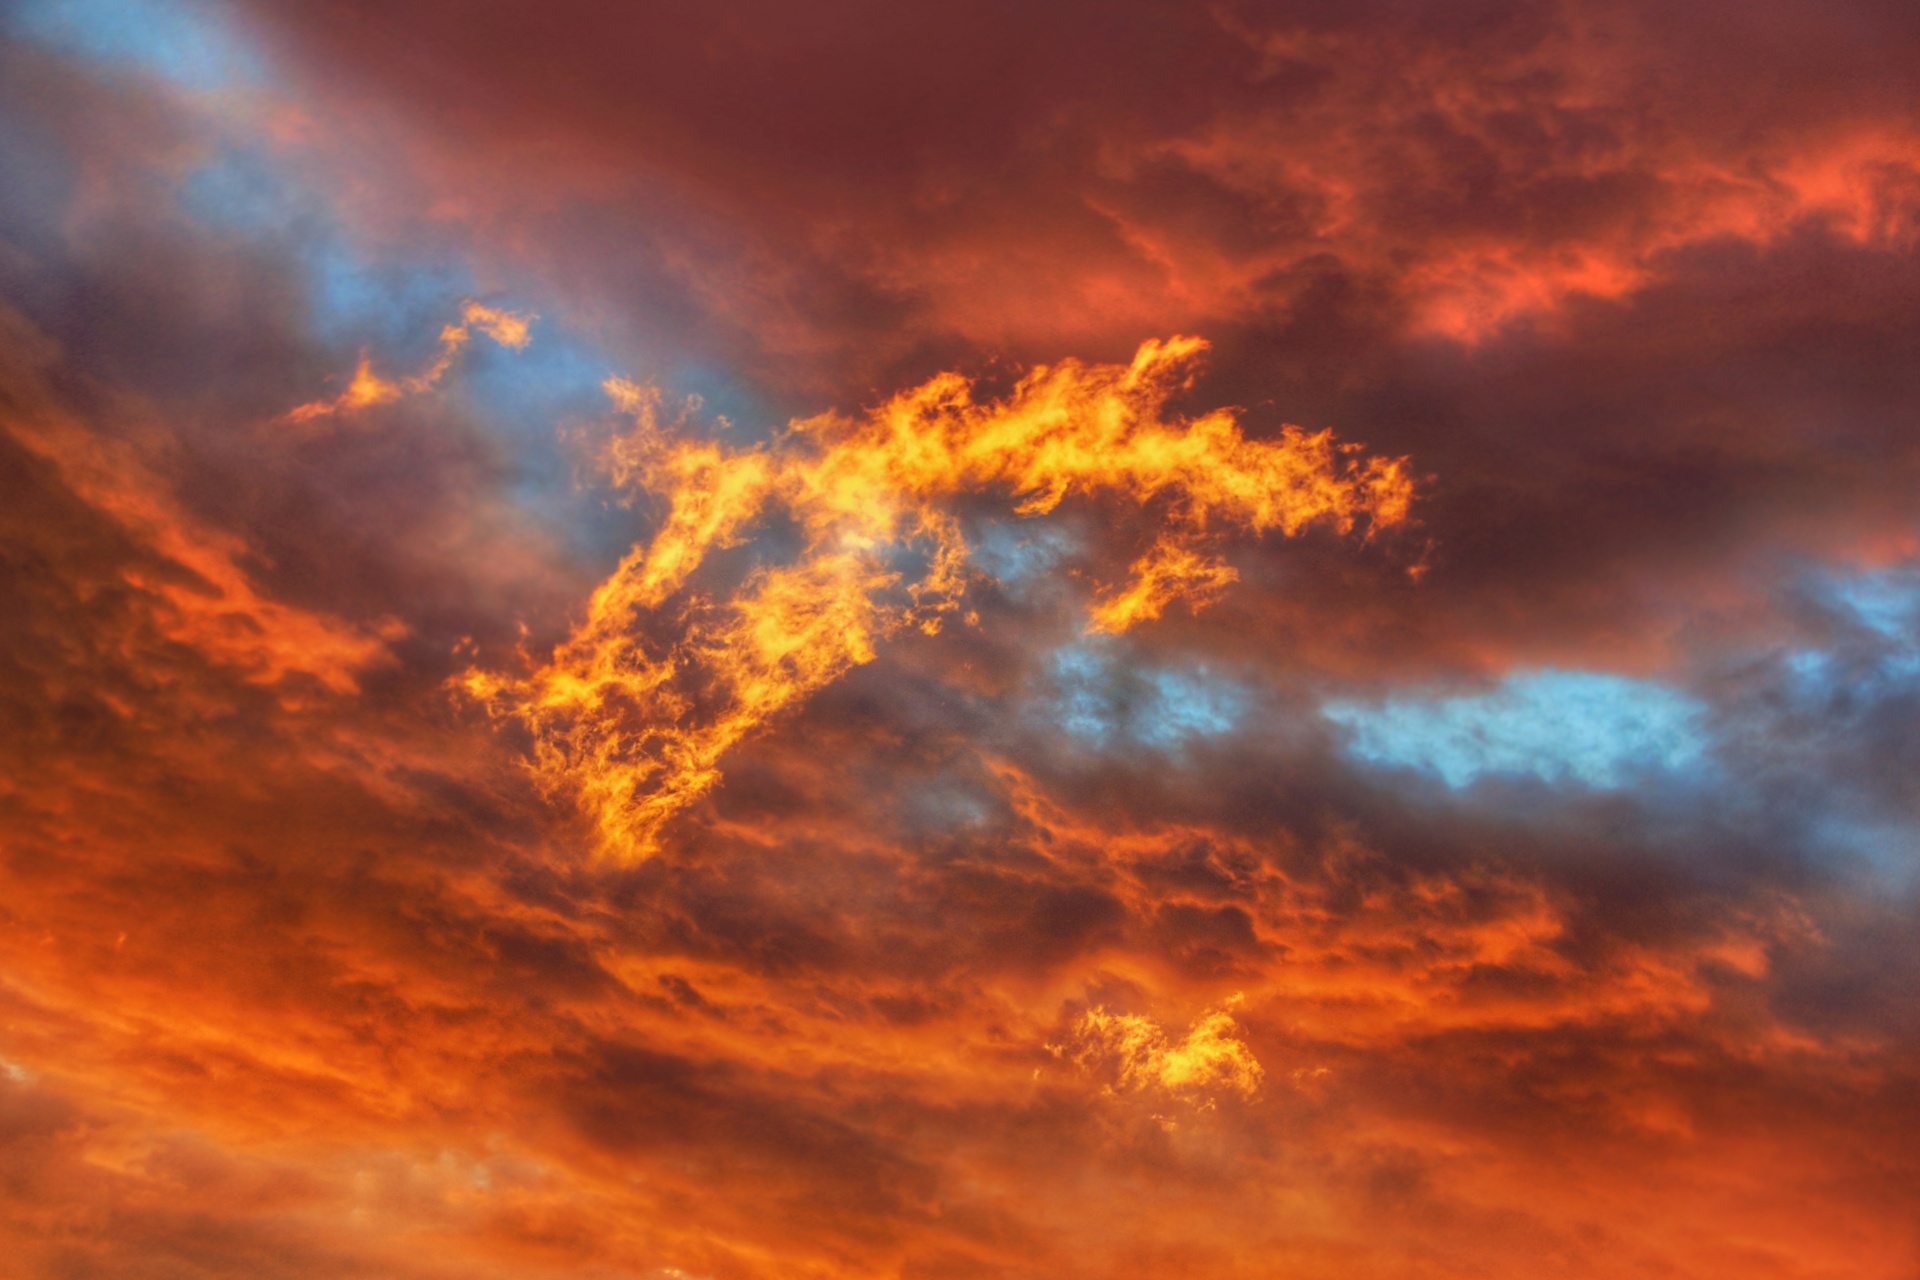 Sky clouds background nature texture weather colors storm sunset sunrise sun storm stormy autumnal mood vacation season